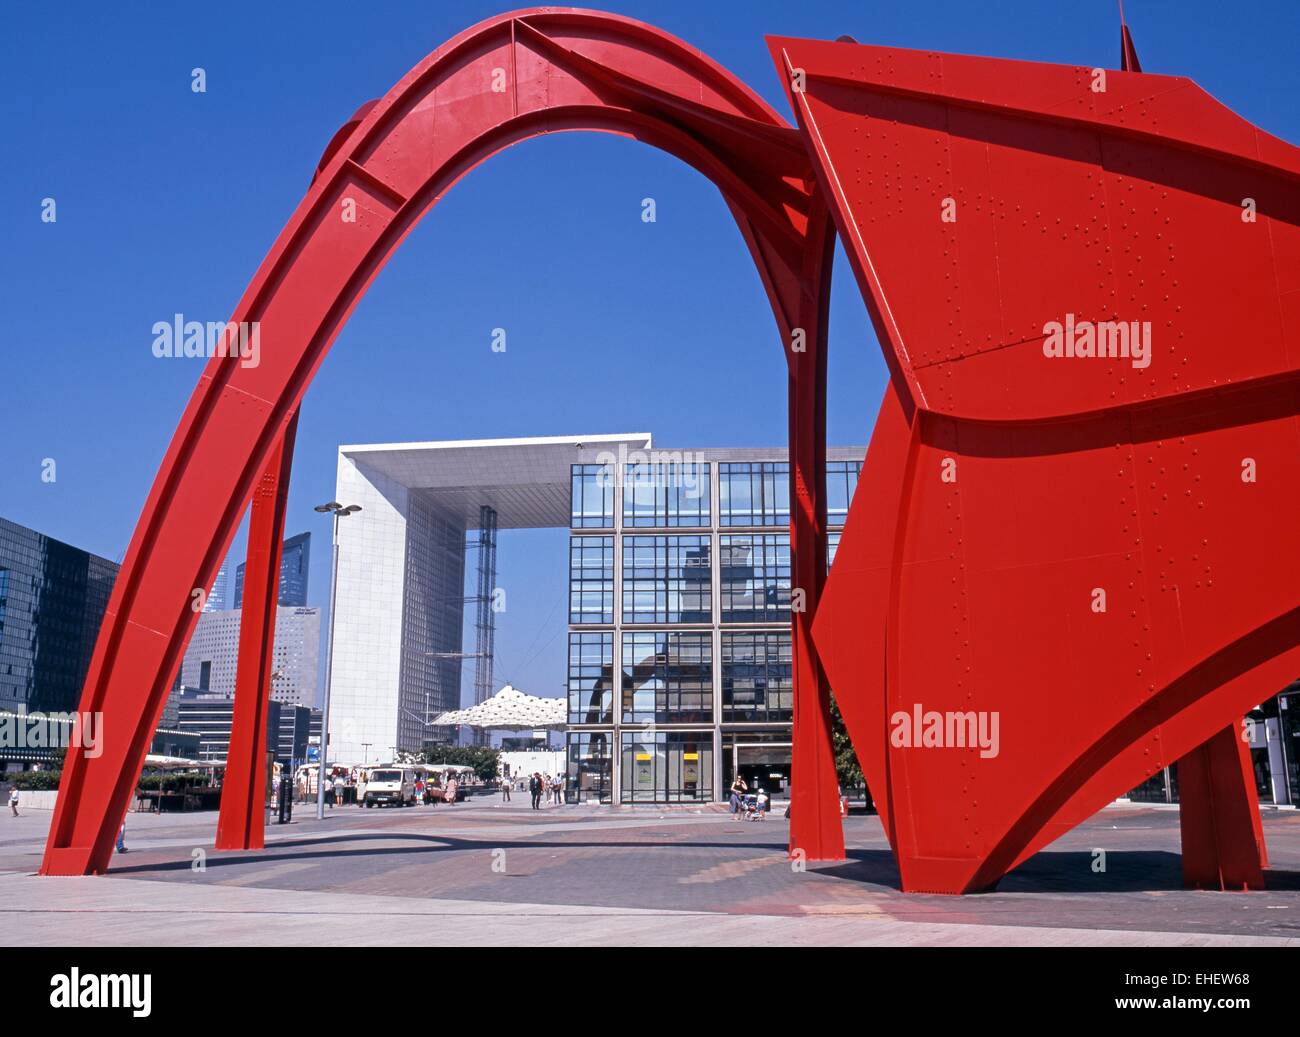 The Grand Arche seen through Calders Red Spider metal sculpture at La Defense, Paris, France, Western Europe. Stock Photo